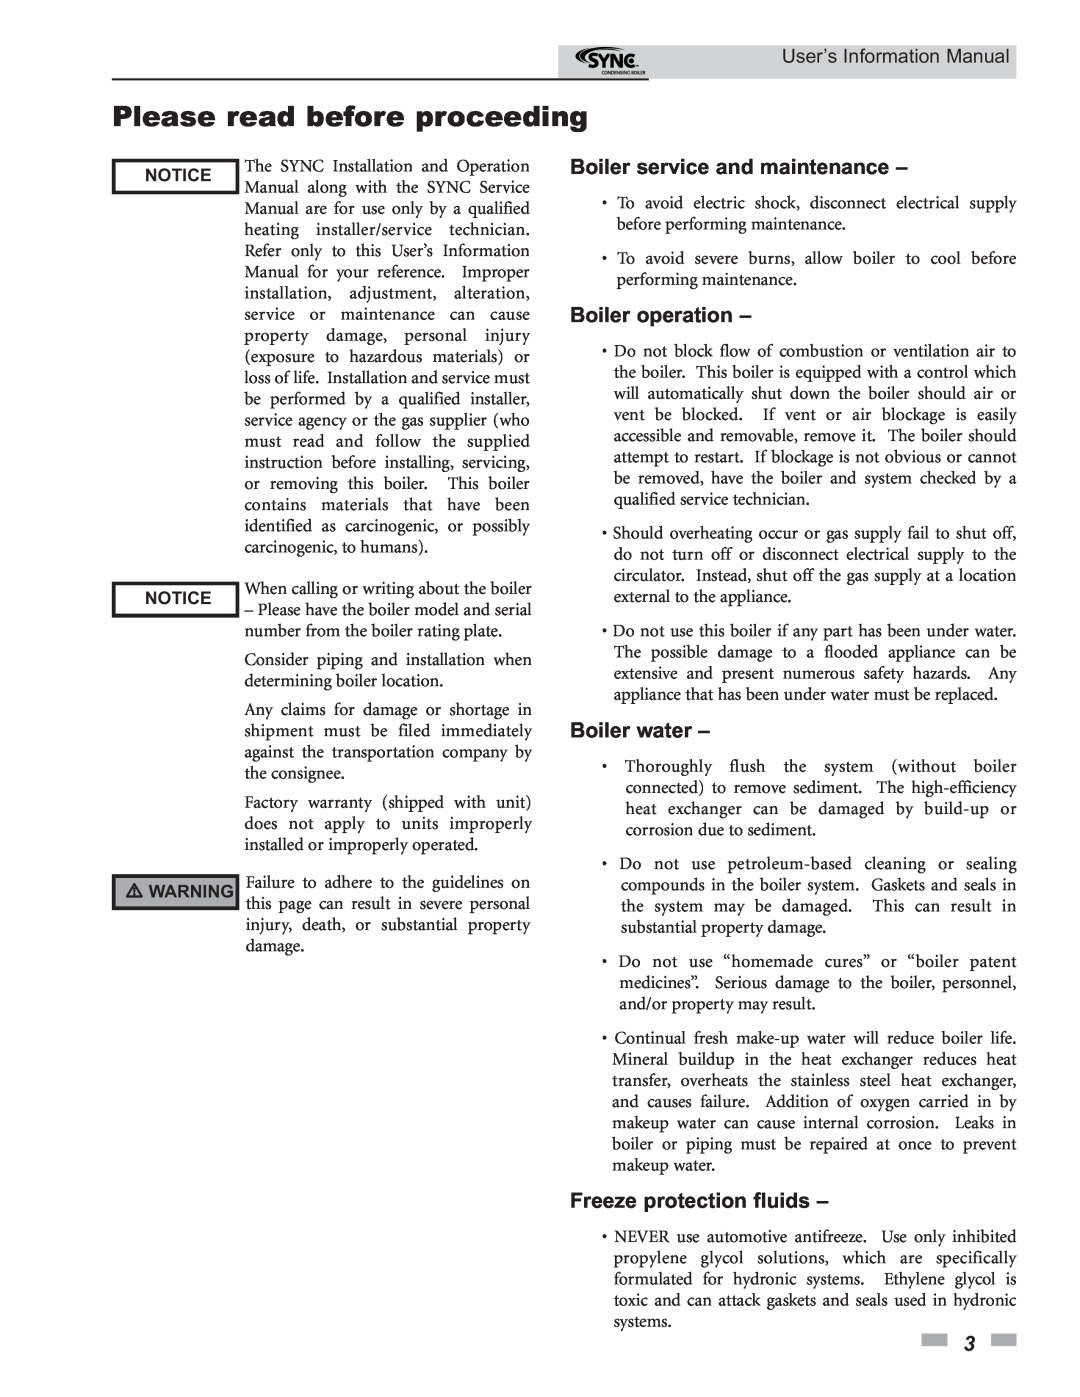 Lochinvar 1.3, 1.5 manual Please read before proceeding, Boiler service and maintenance, Boiler operation, Boiler water 